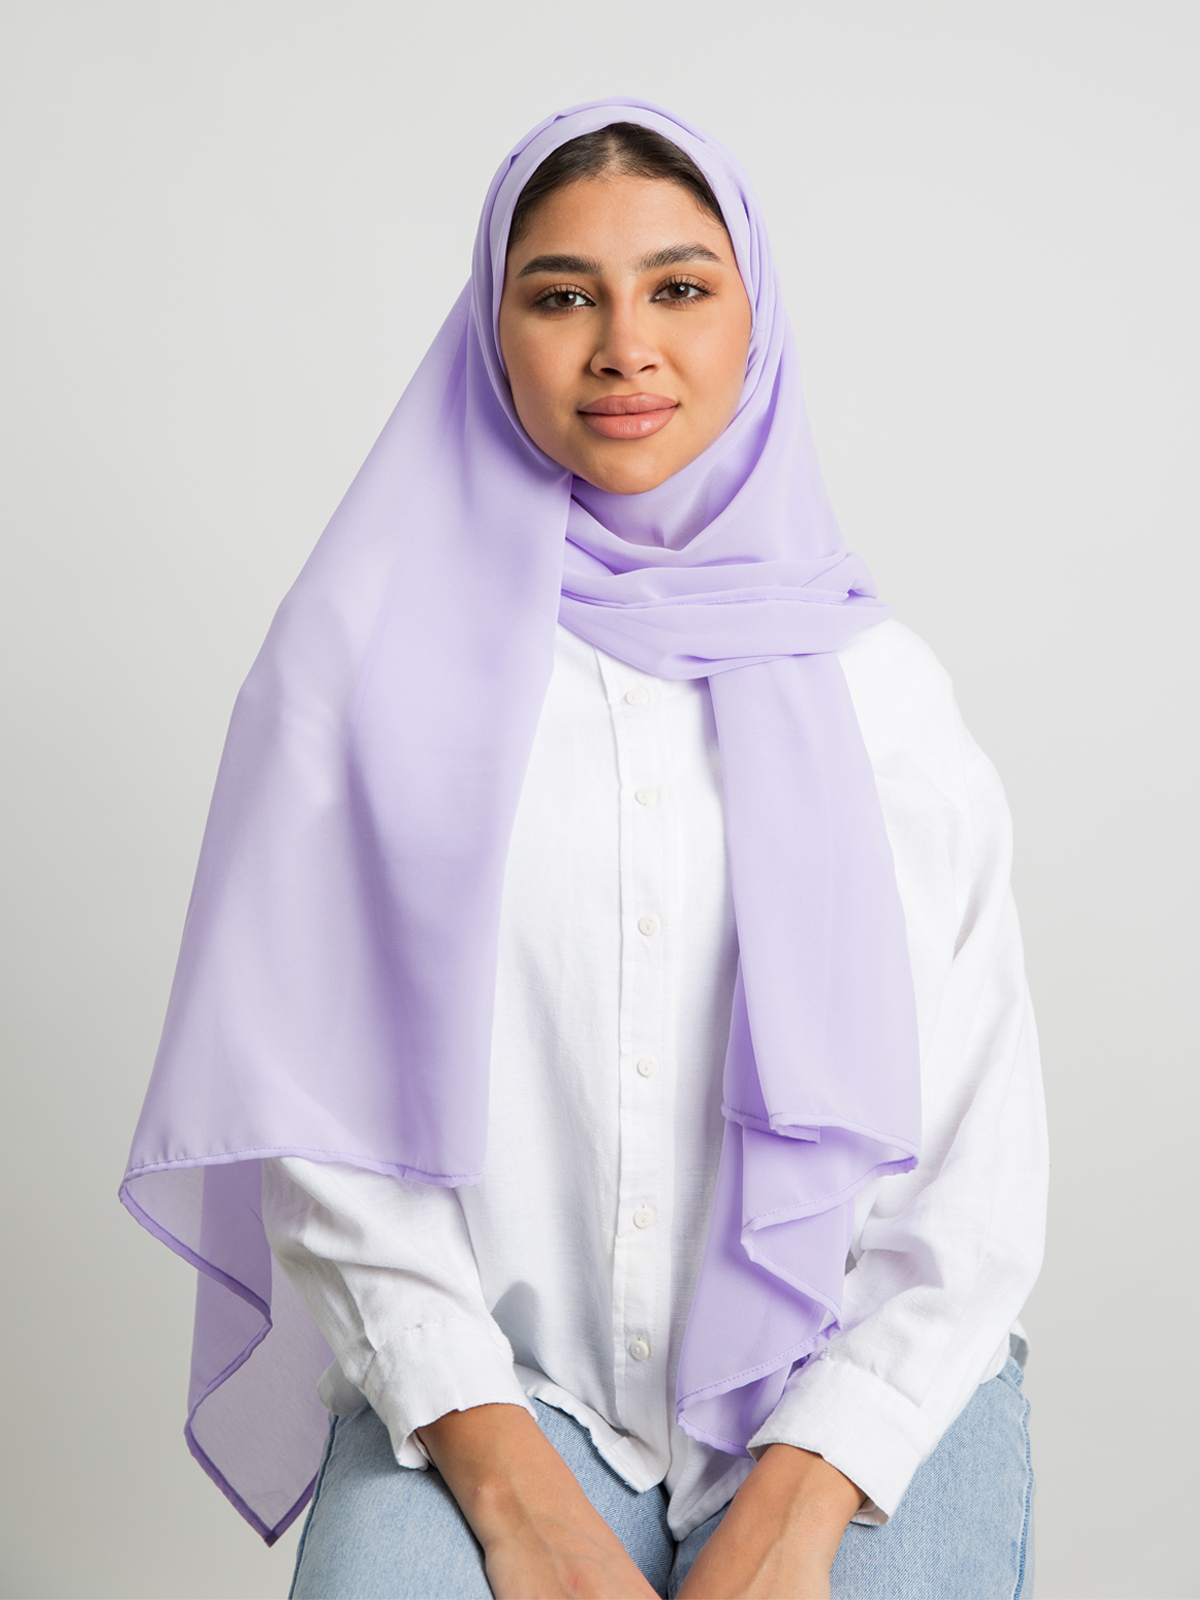 Lavender plain light chiffon tarha by kaafmeem hijab for daily wear available in multiple colors